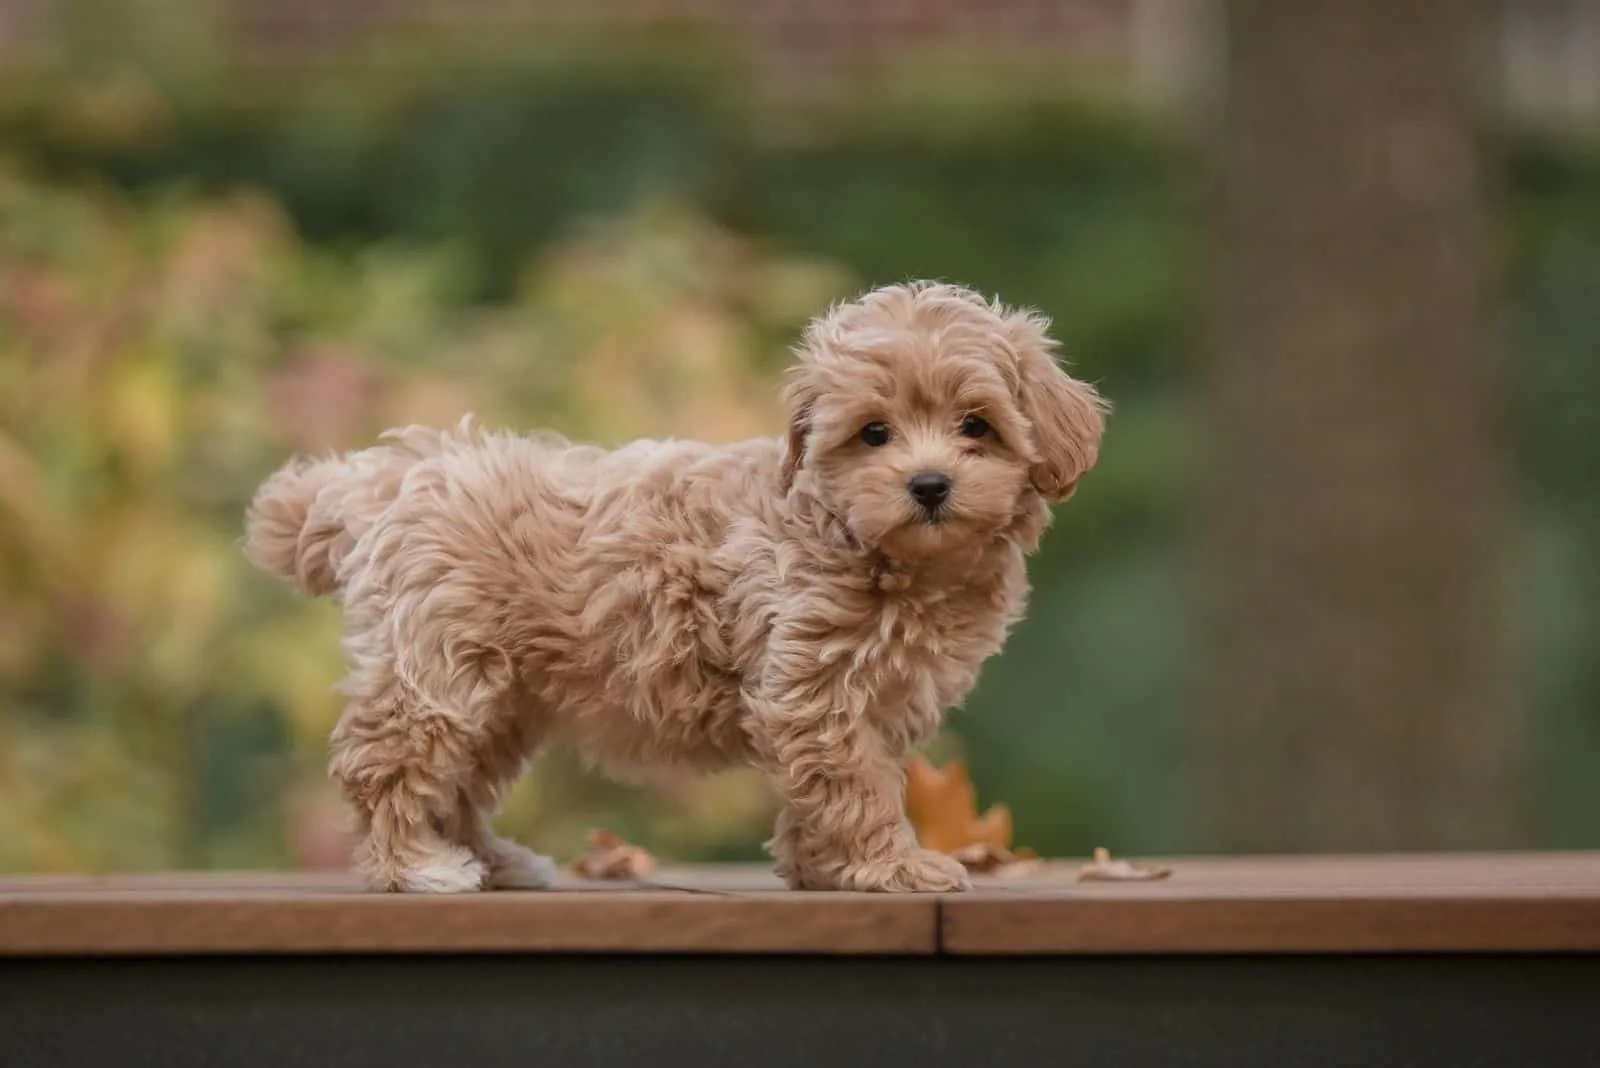 Adorable Maltese and Poodle mix puppy standing over the platform